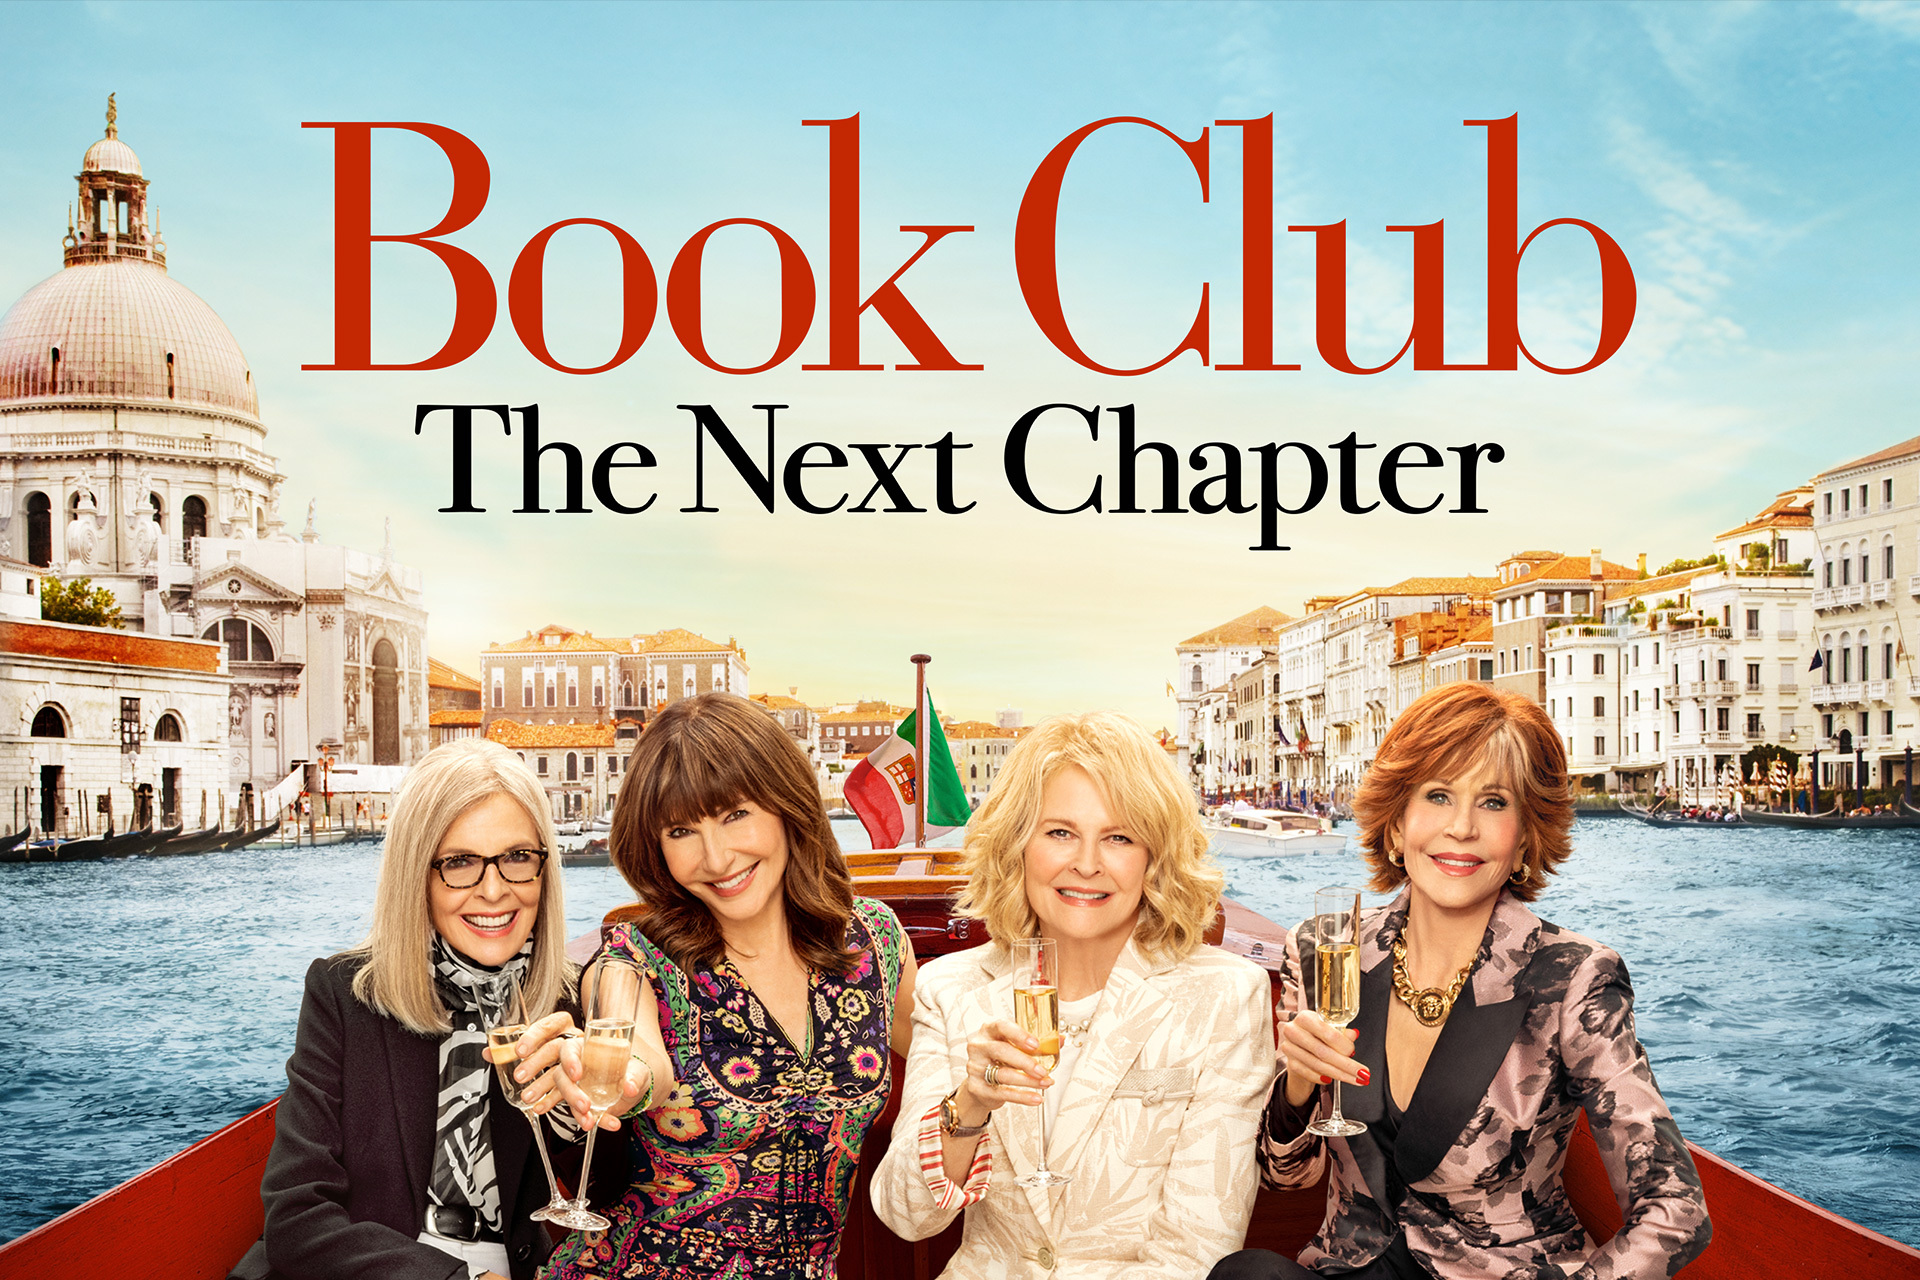 Book Club: The Next Chapter Streaming on Peacock June 30